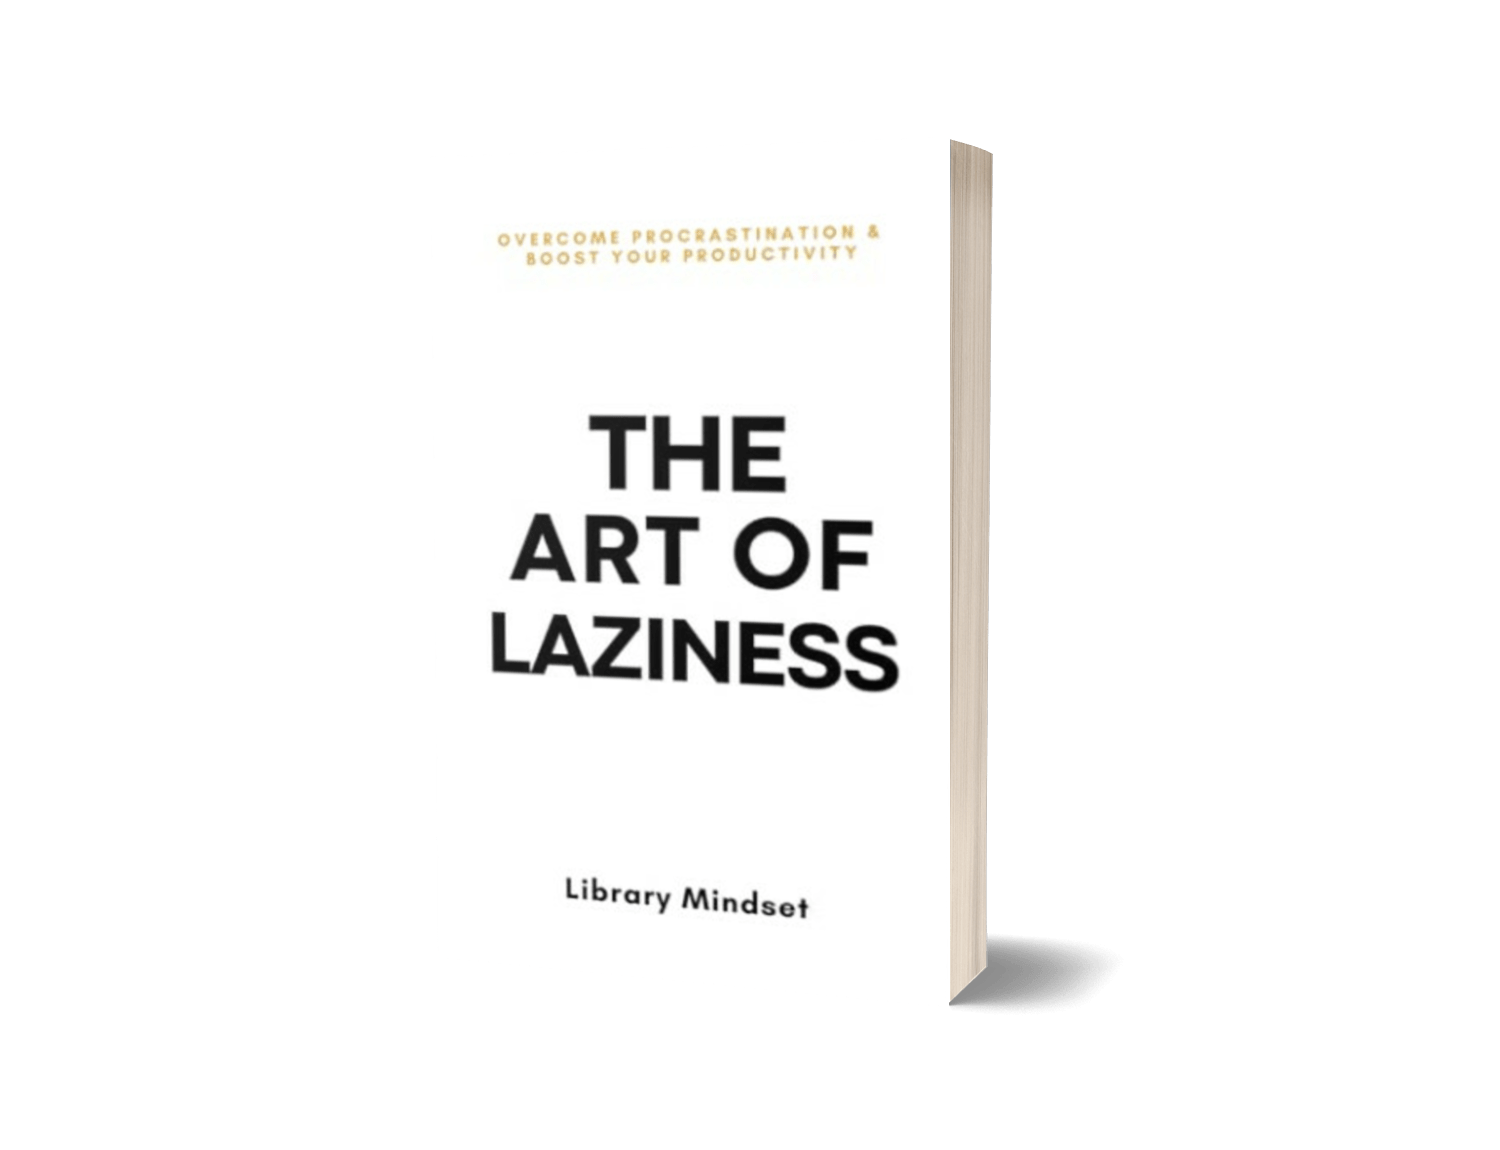 The Art of Laziness: Overcome Procrastination & Improve Your Productivity by Library Mindset